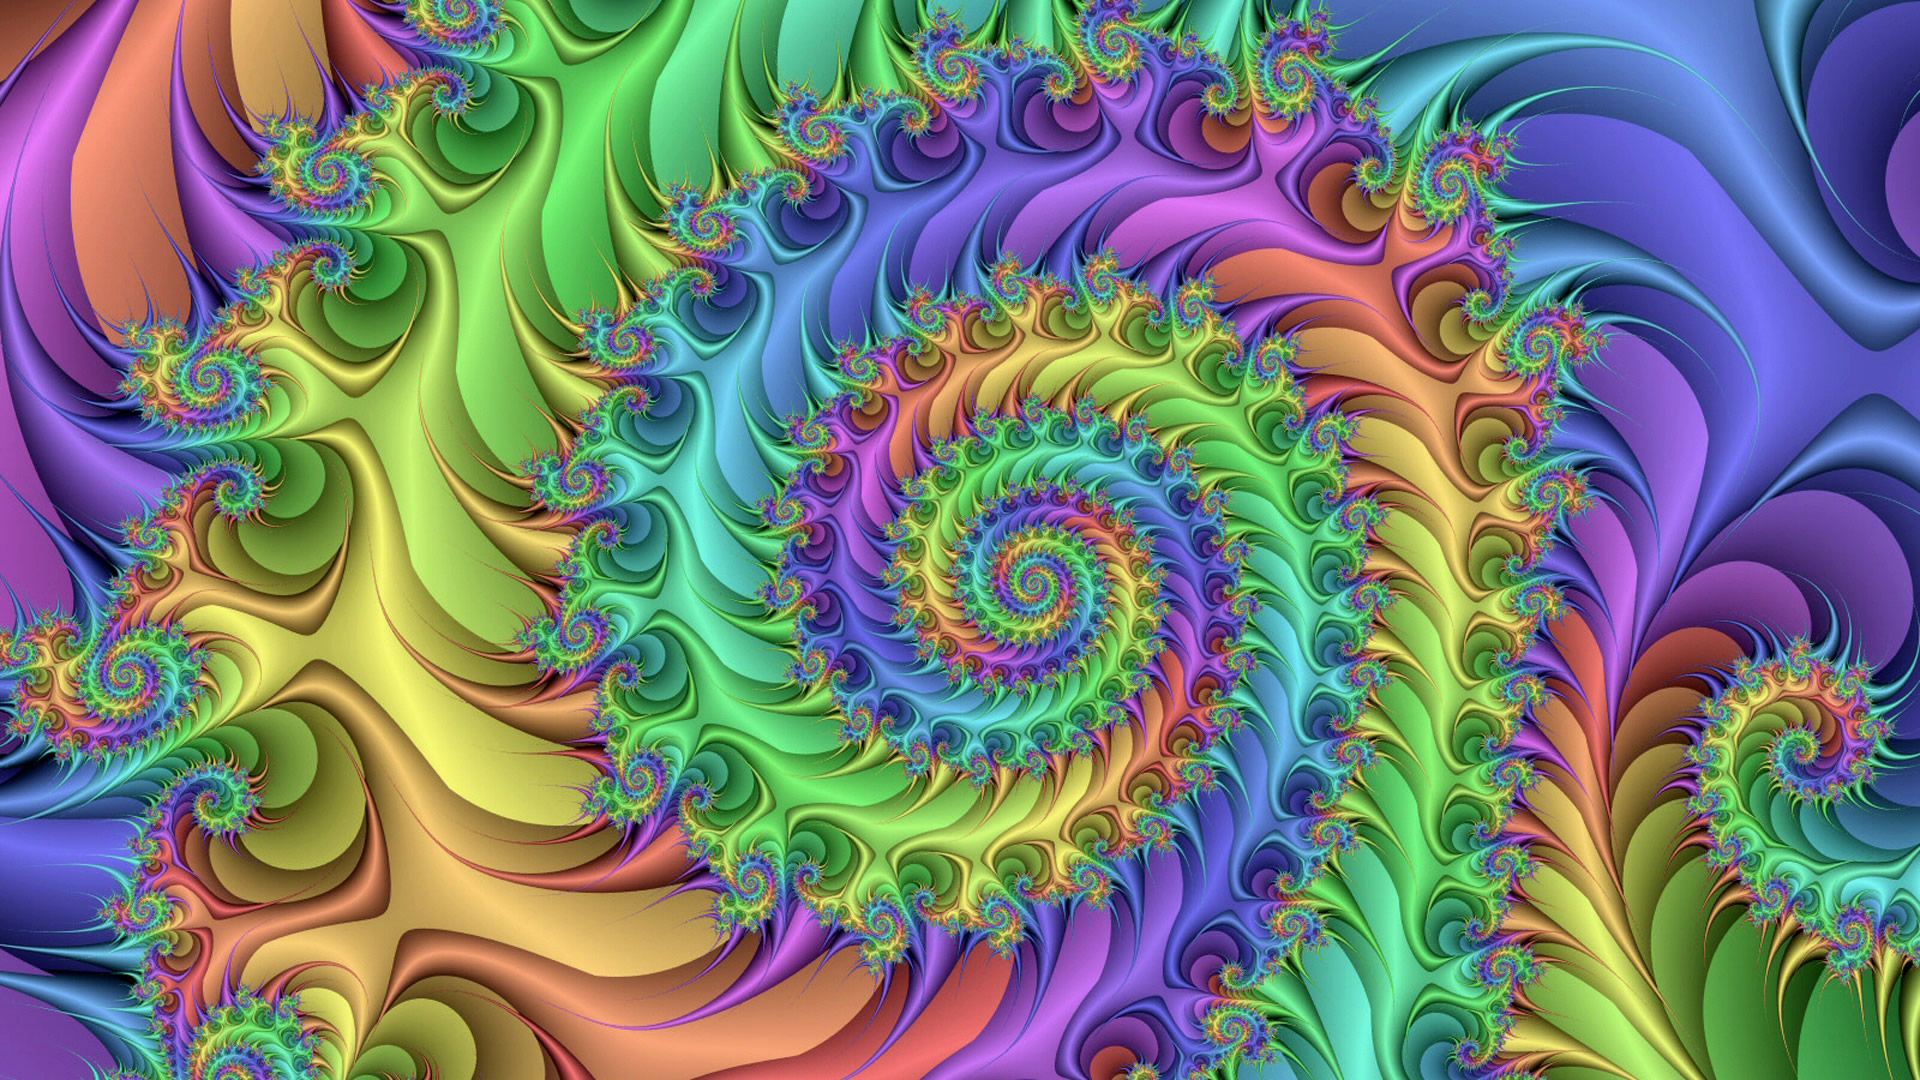 Colorful Mushroom Psychedelic HD Trippy Wallpapers | HD Wallpapers | ID  #47095